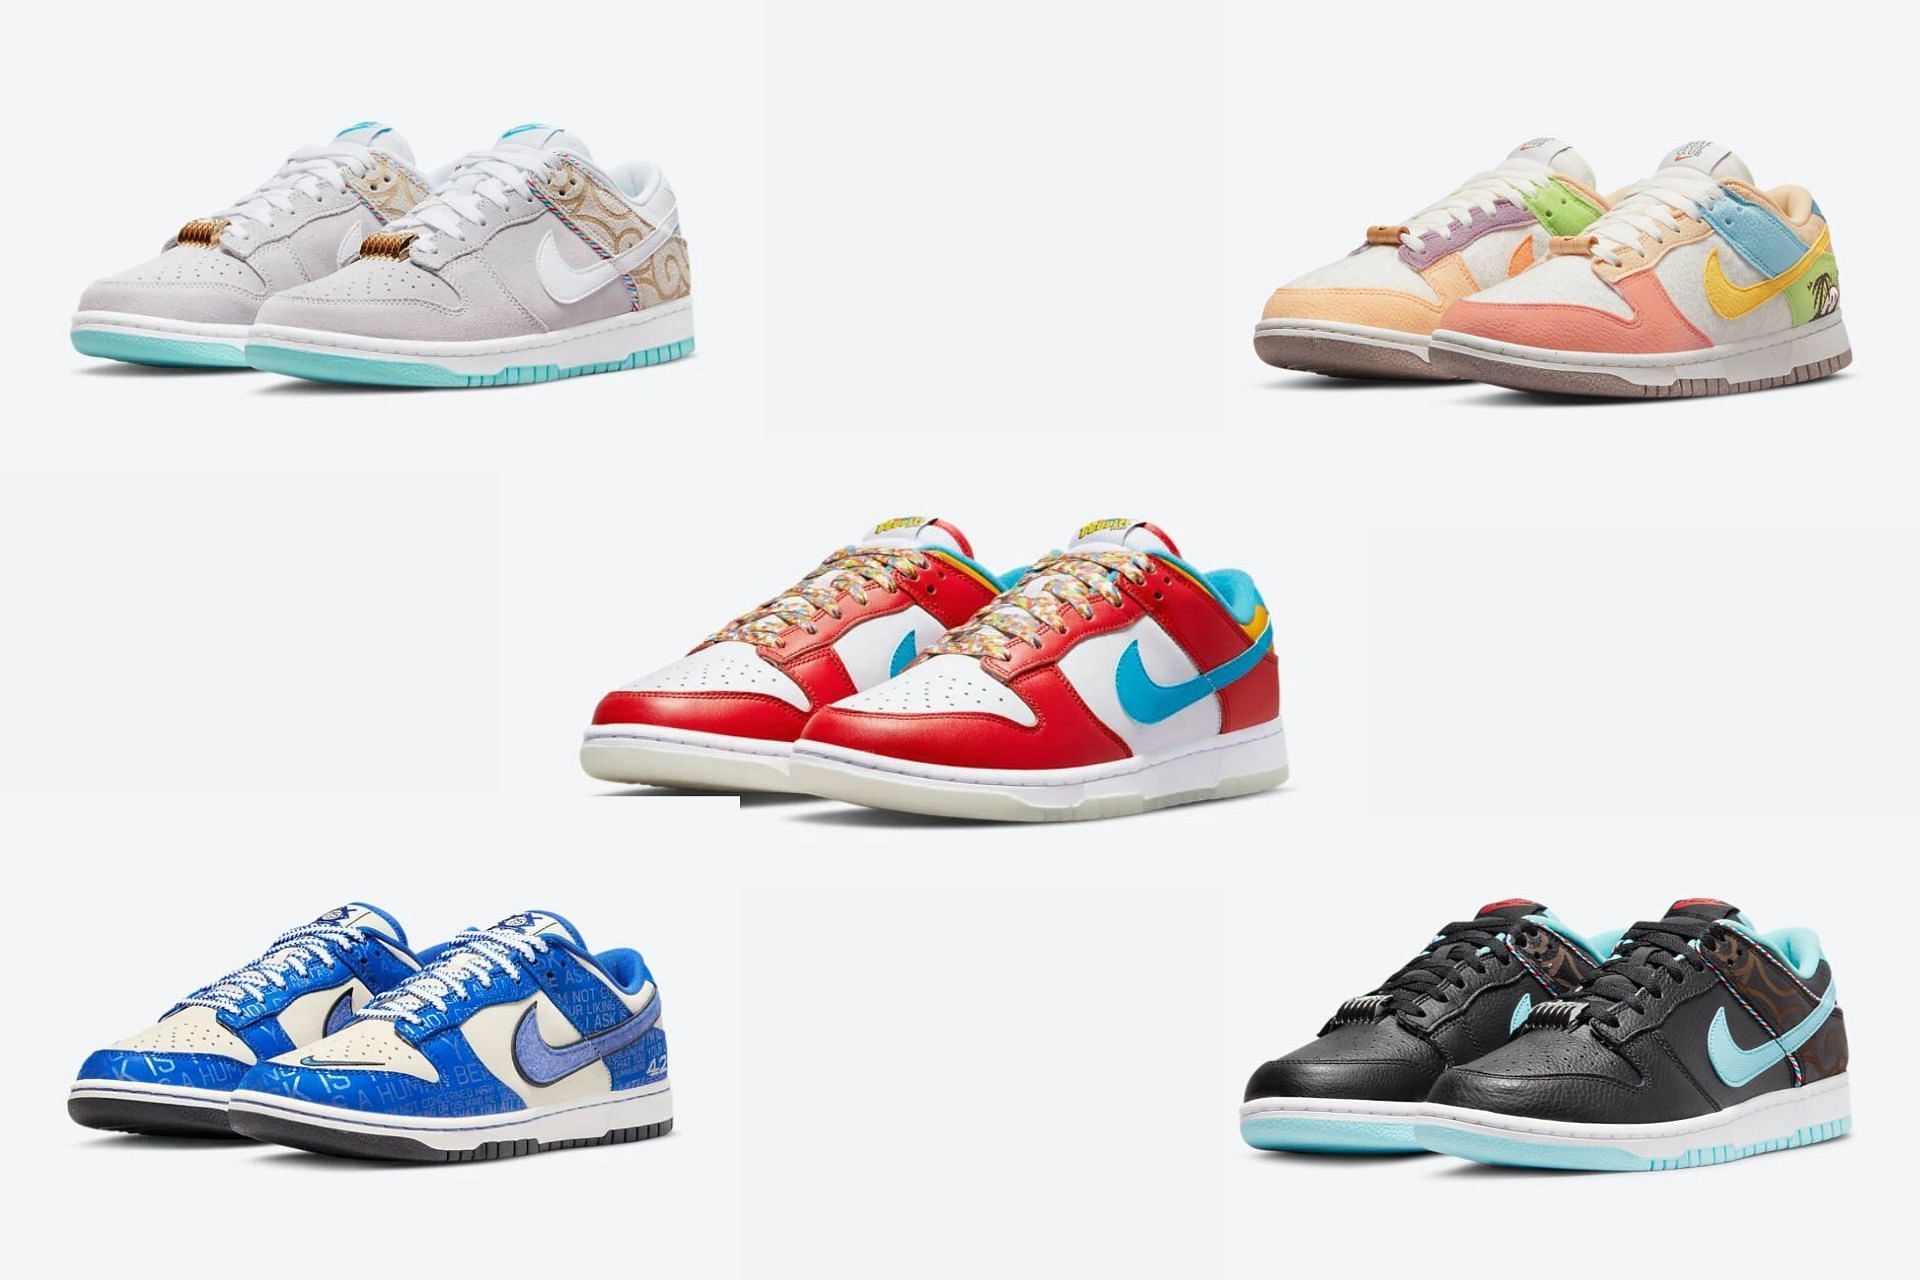 Nike Dunks Colorways | peacecommission.kdsg.gov.ng